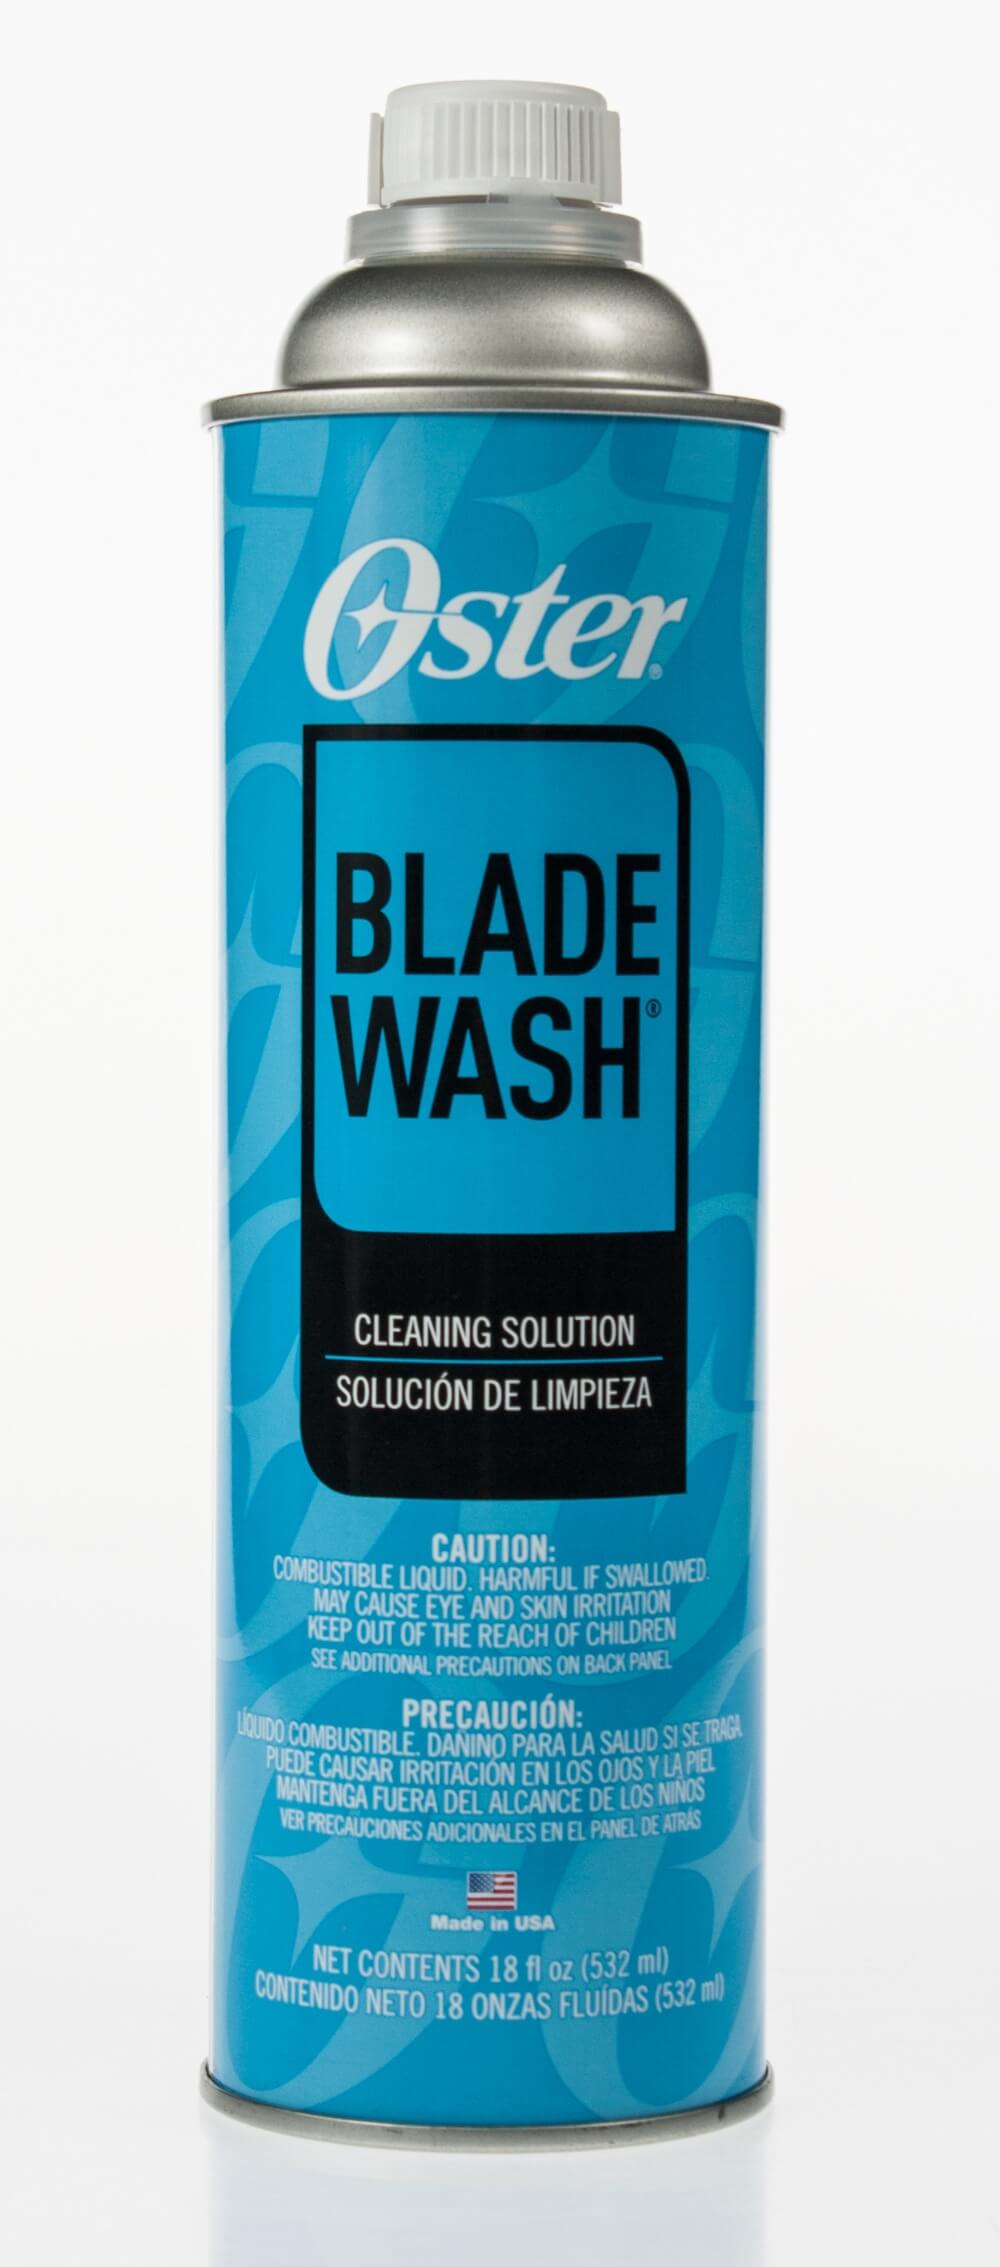 Oster blade wash.  Using my time to clean! This is what it looks